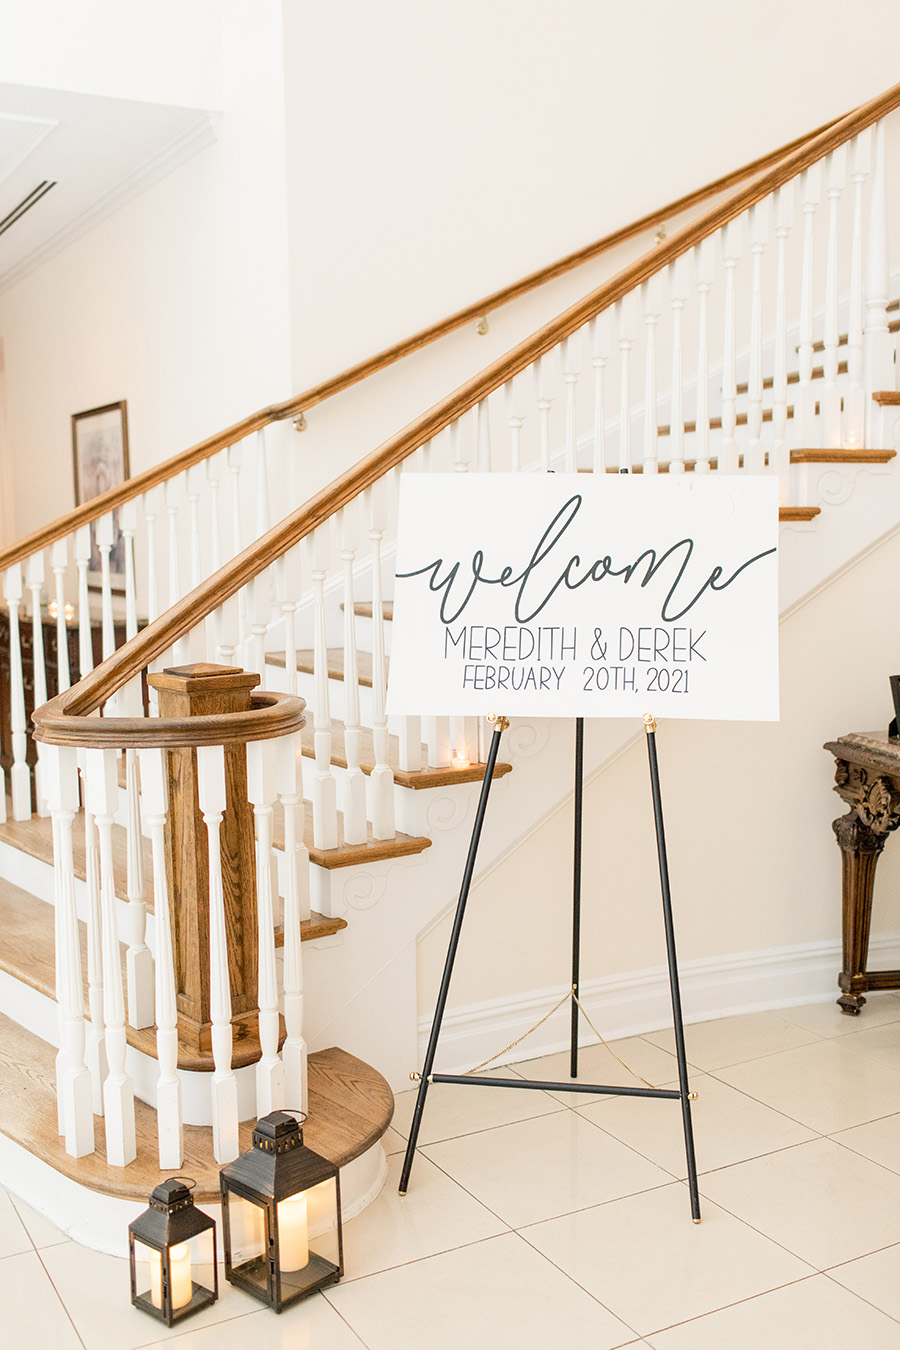 DIY welcome to our wedding sign